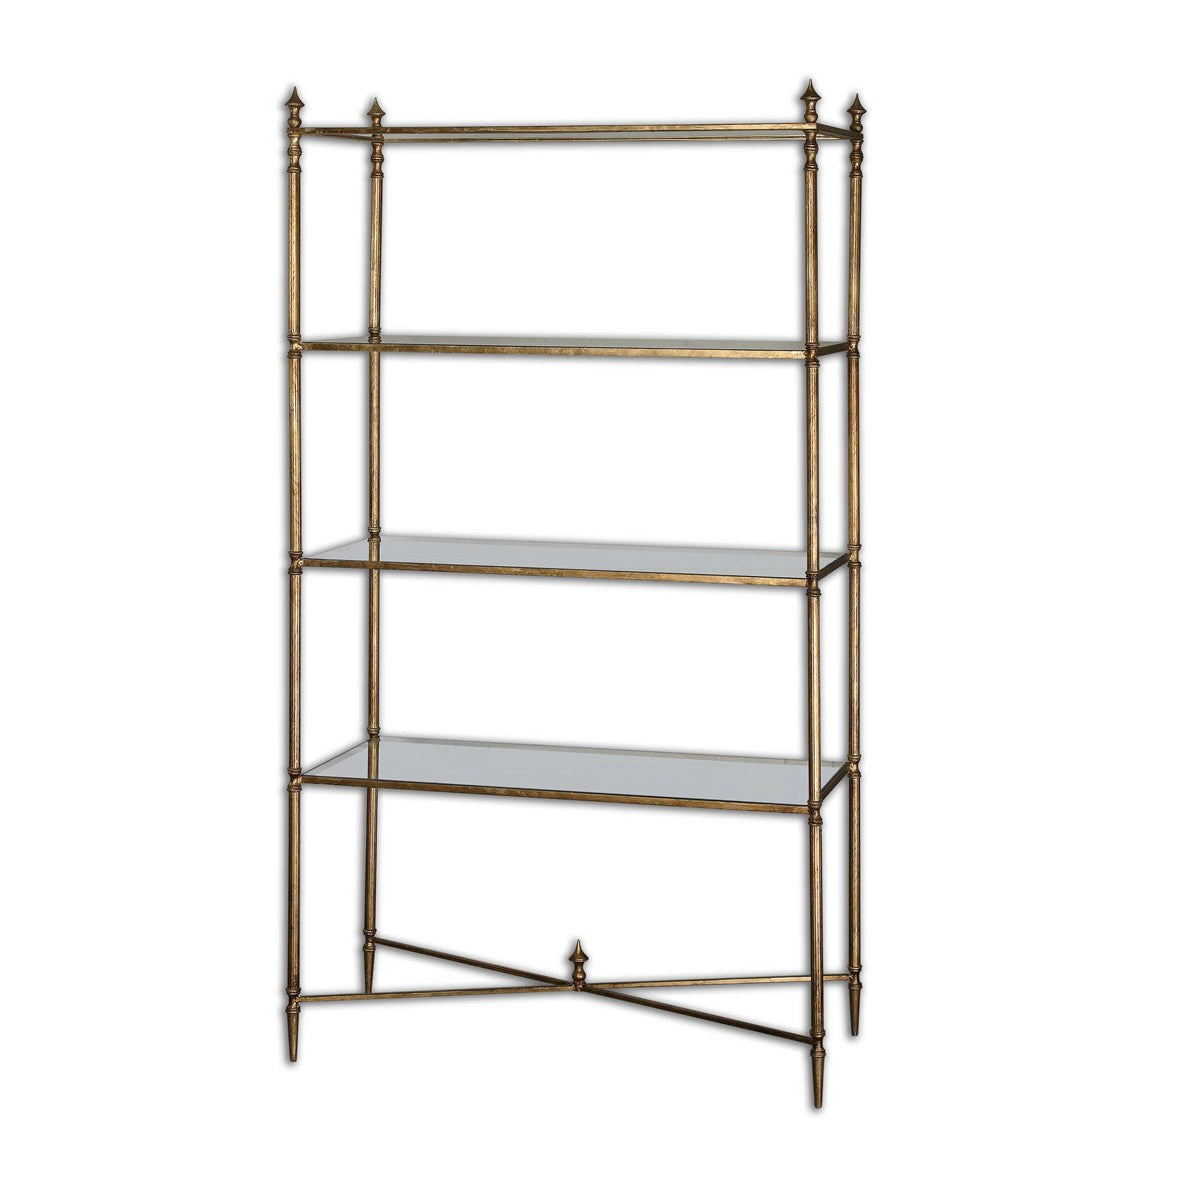 HENZLER ETAGERE. Forged Iron. small business.available now. Hudson valley. 